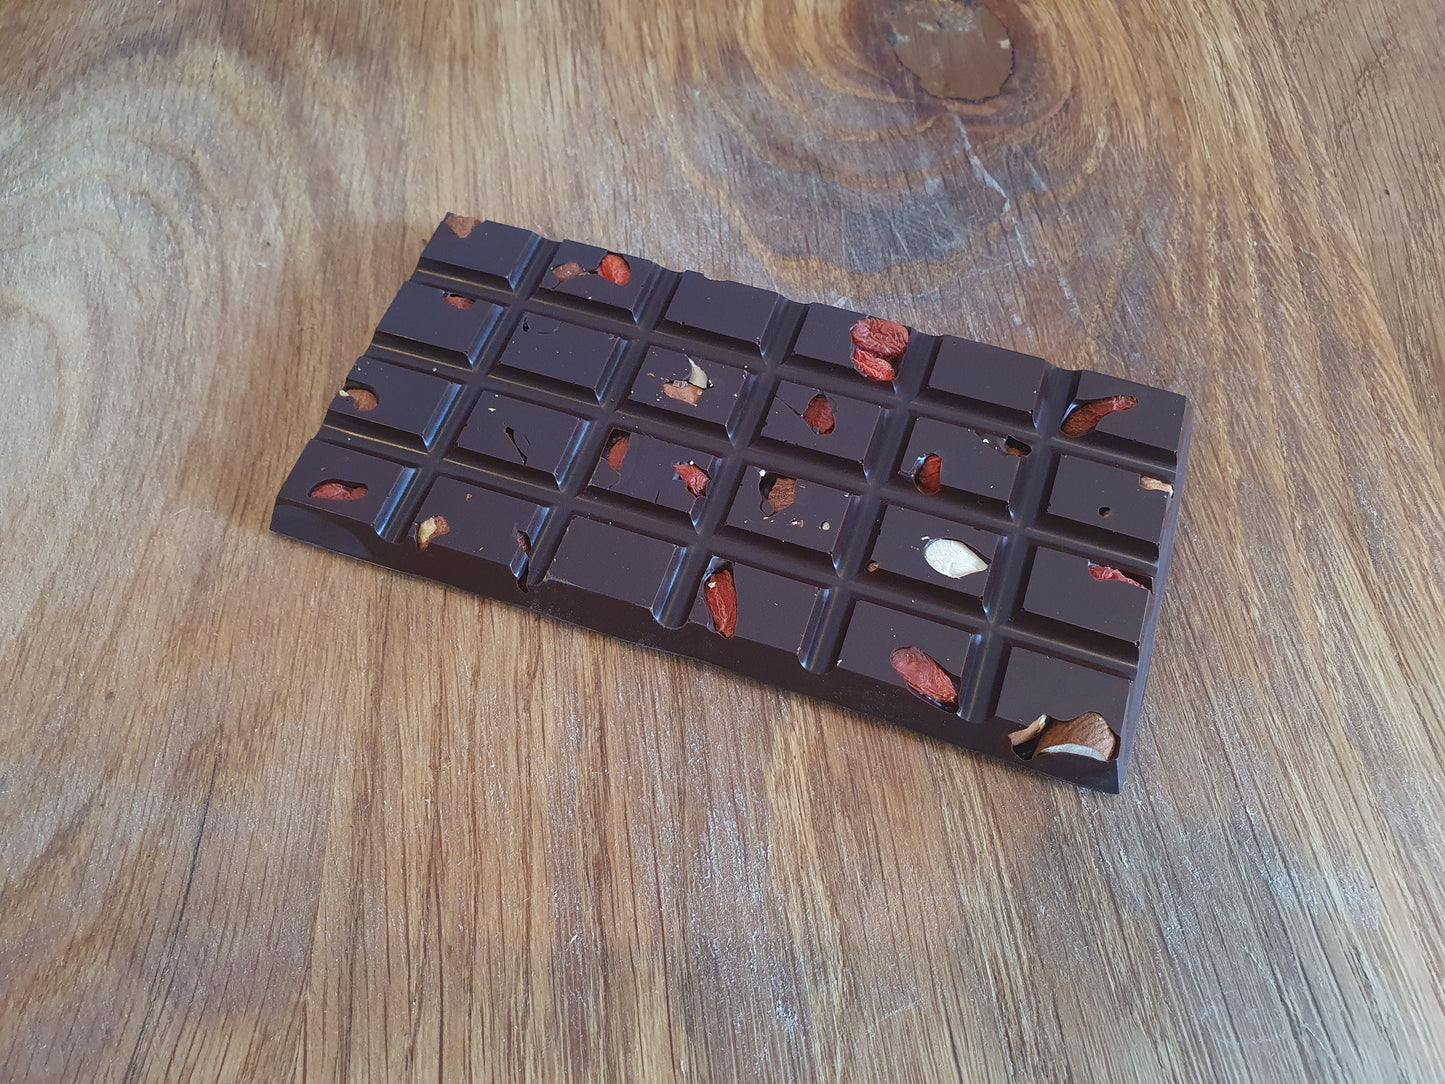 LIMITED EDITION Handmade Chocolate Bars- Goji Berry & Roasted Almond (pack of 3)